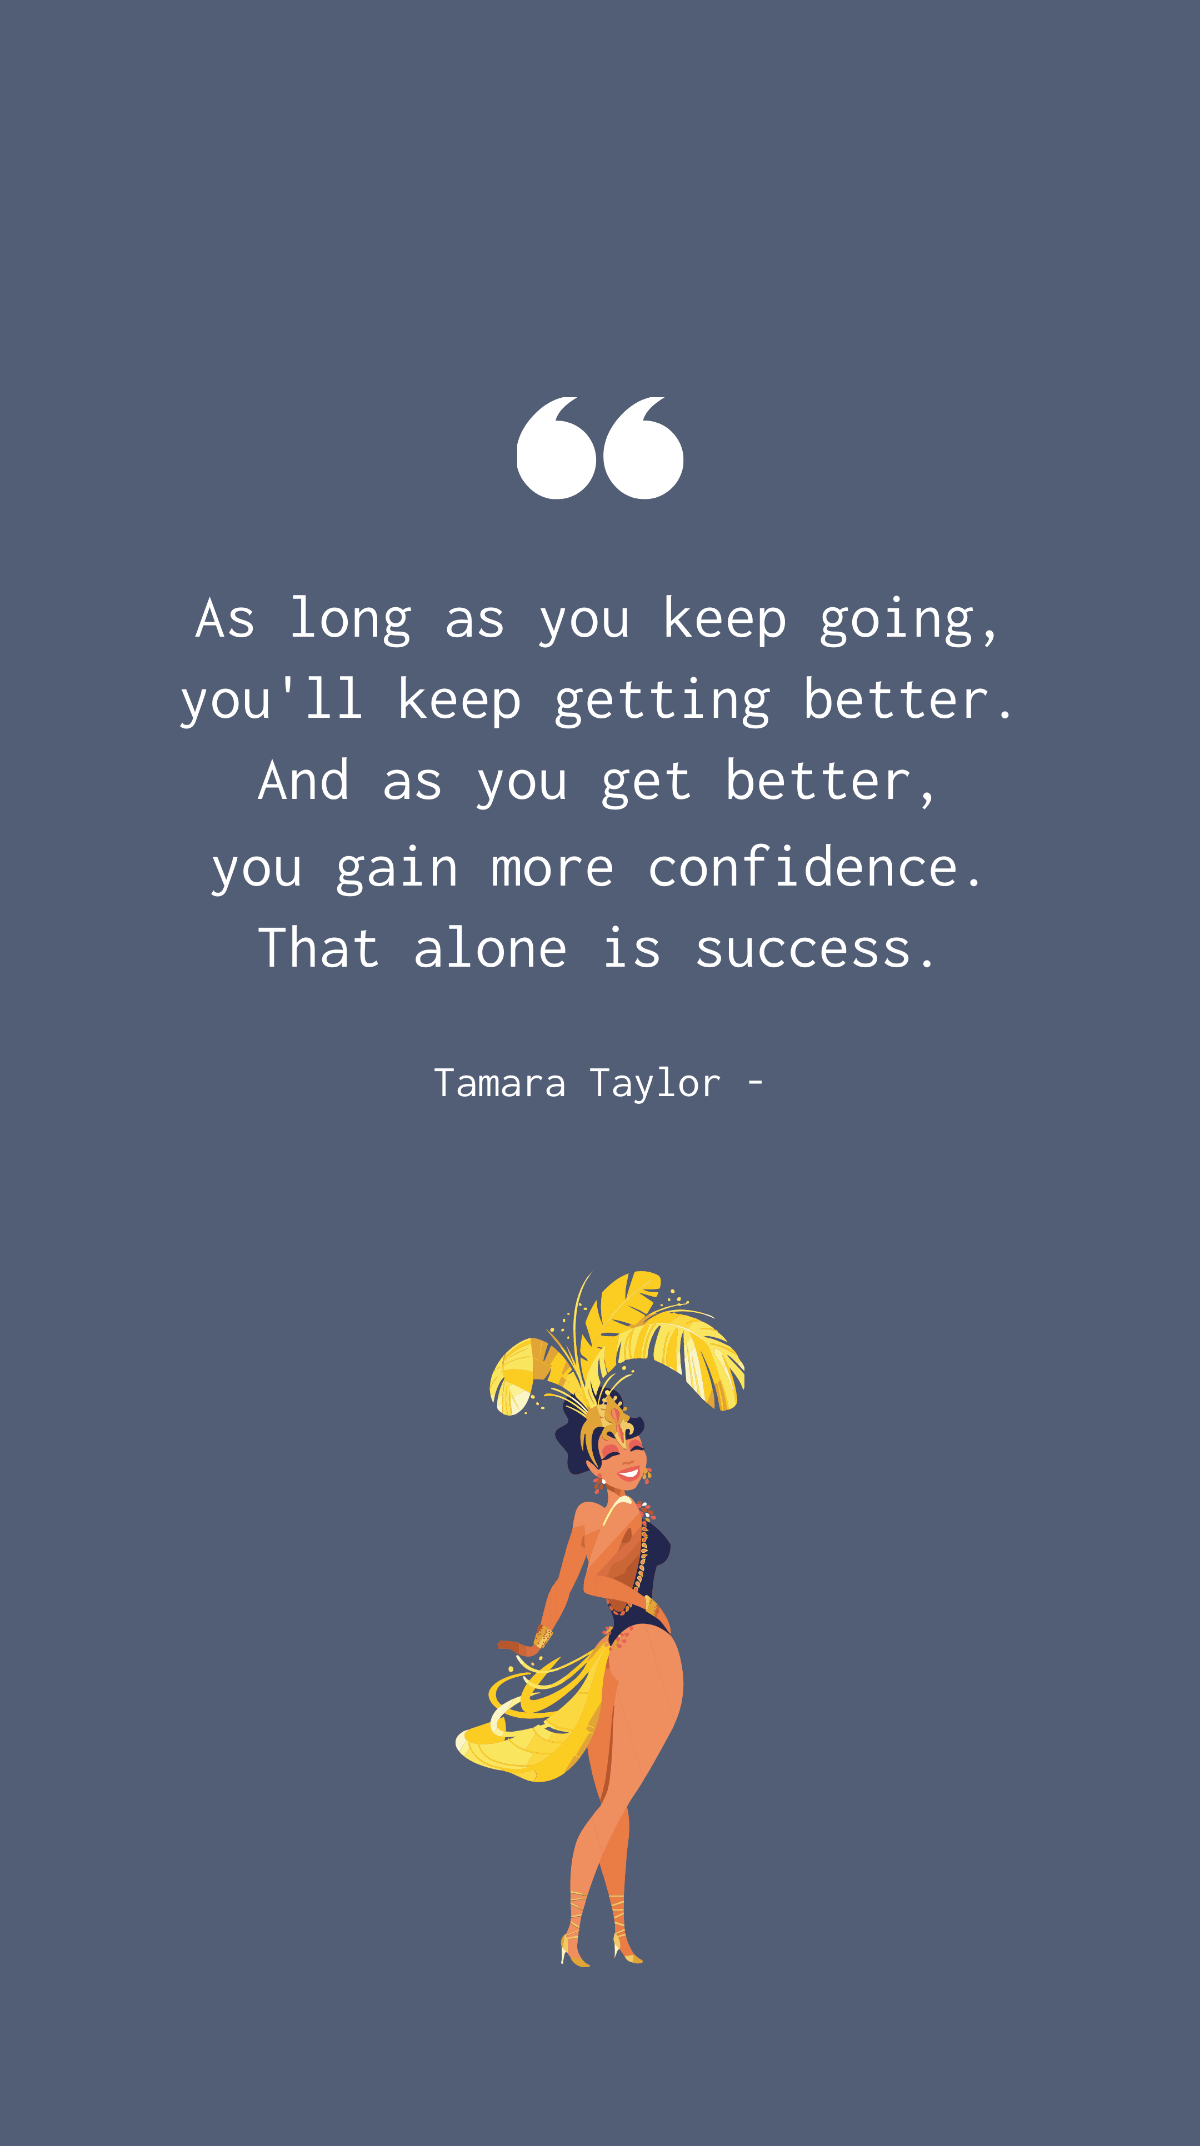 Free Tamara Taylor - As long as you keep going, you'll keep getting better. And as you get better, you gain more confidence. That alone is success. Template